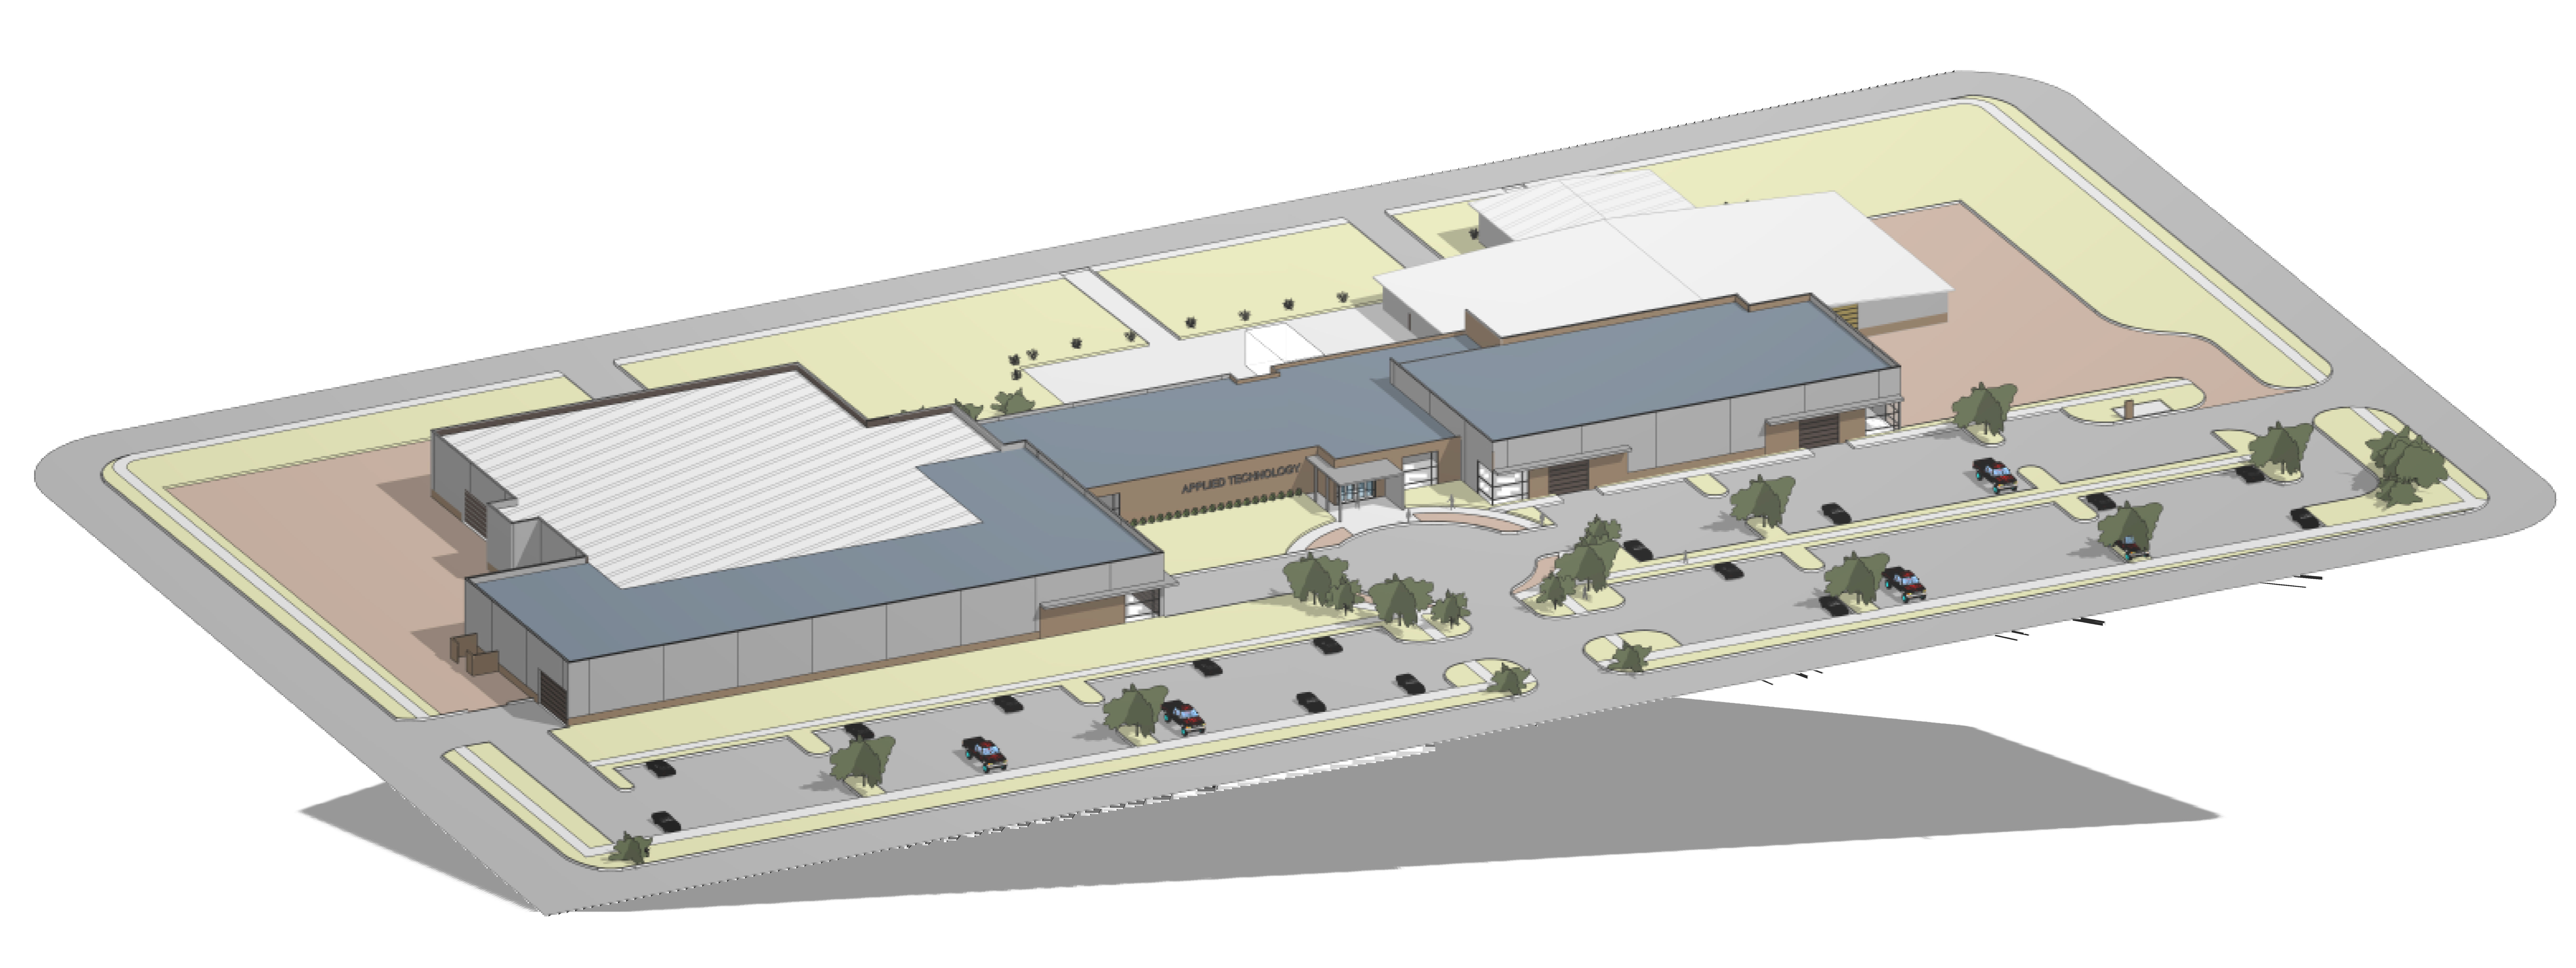 Design of Northeastern CTE expansion of Applied Technology Campus